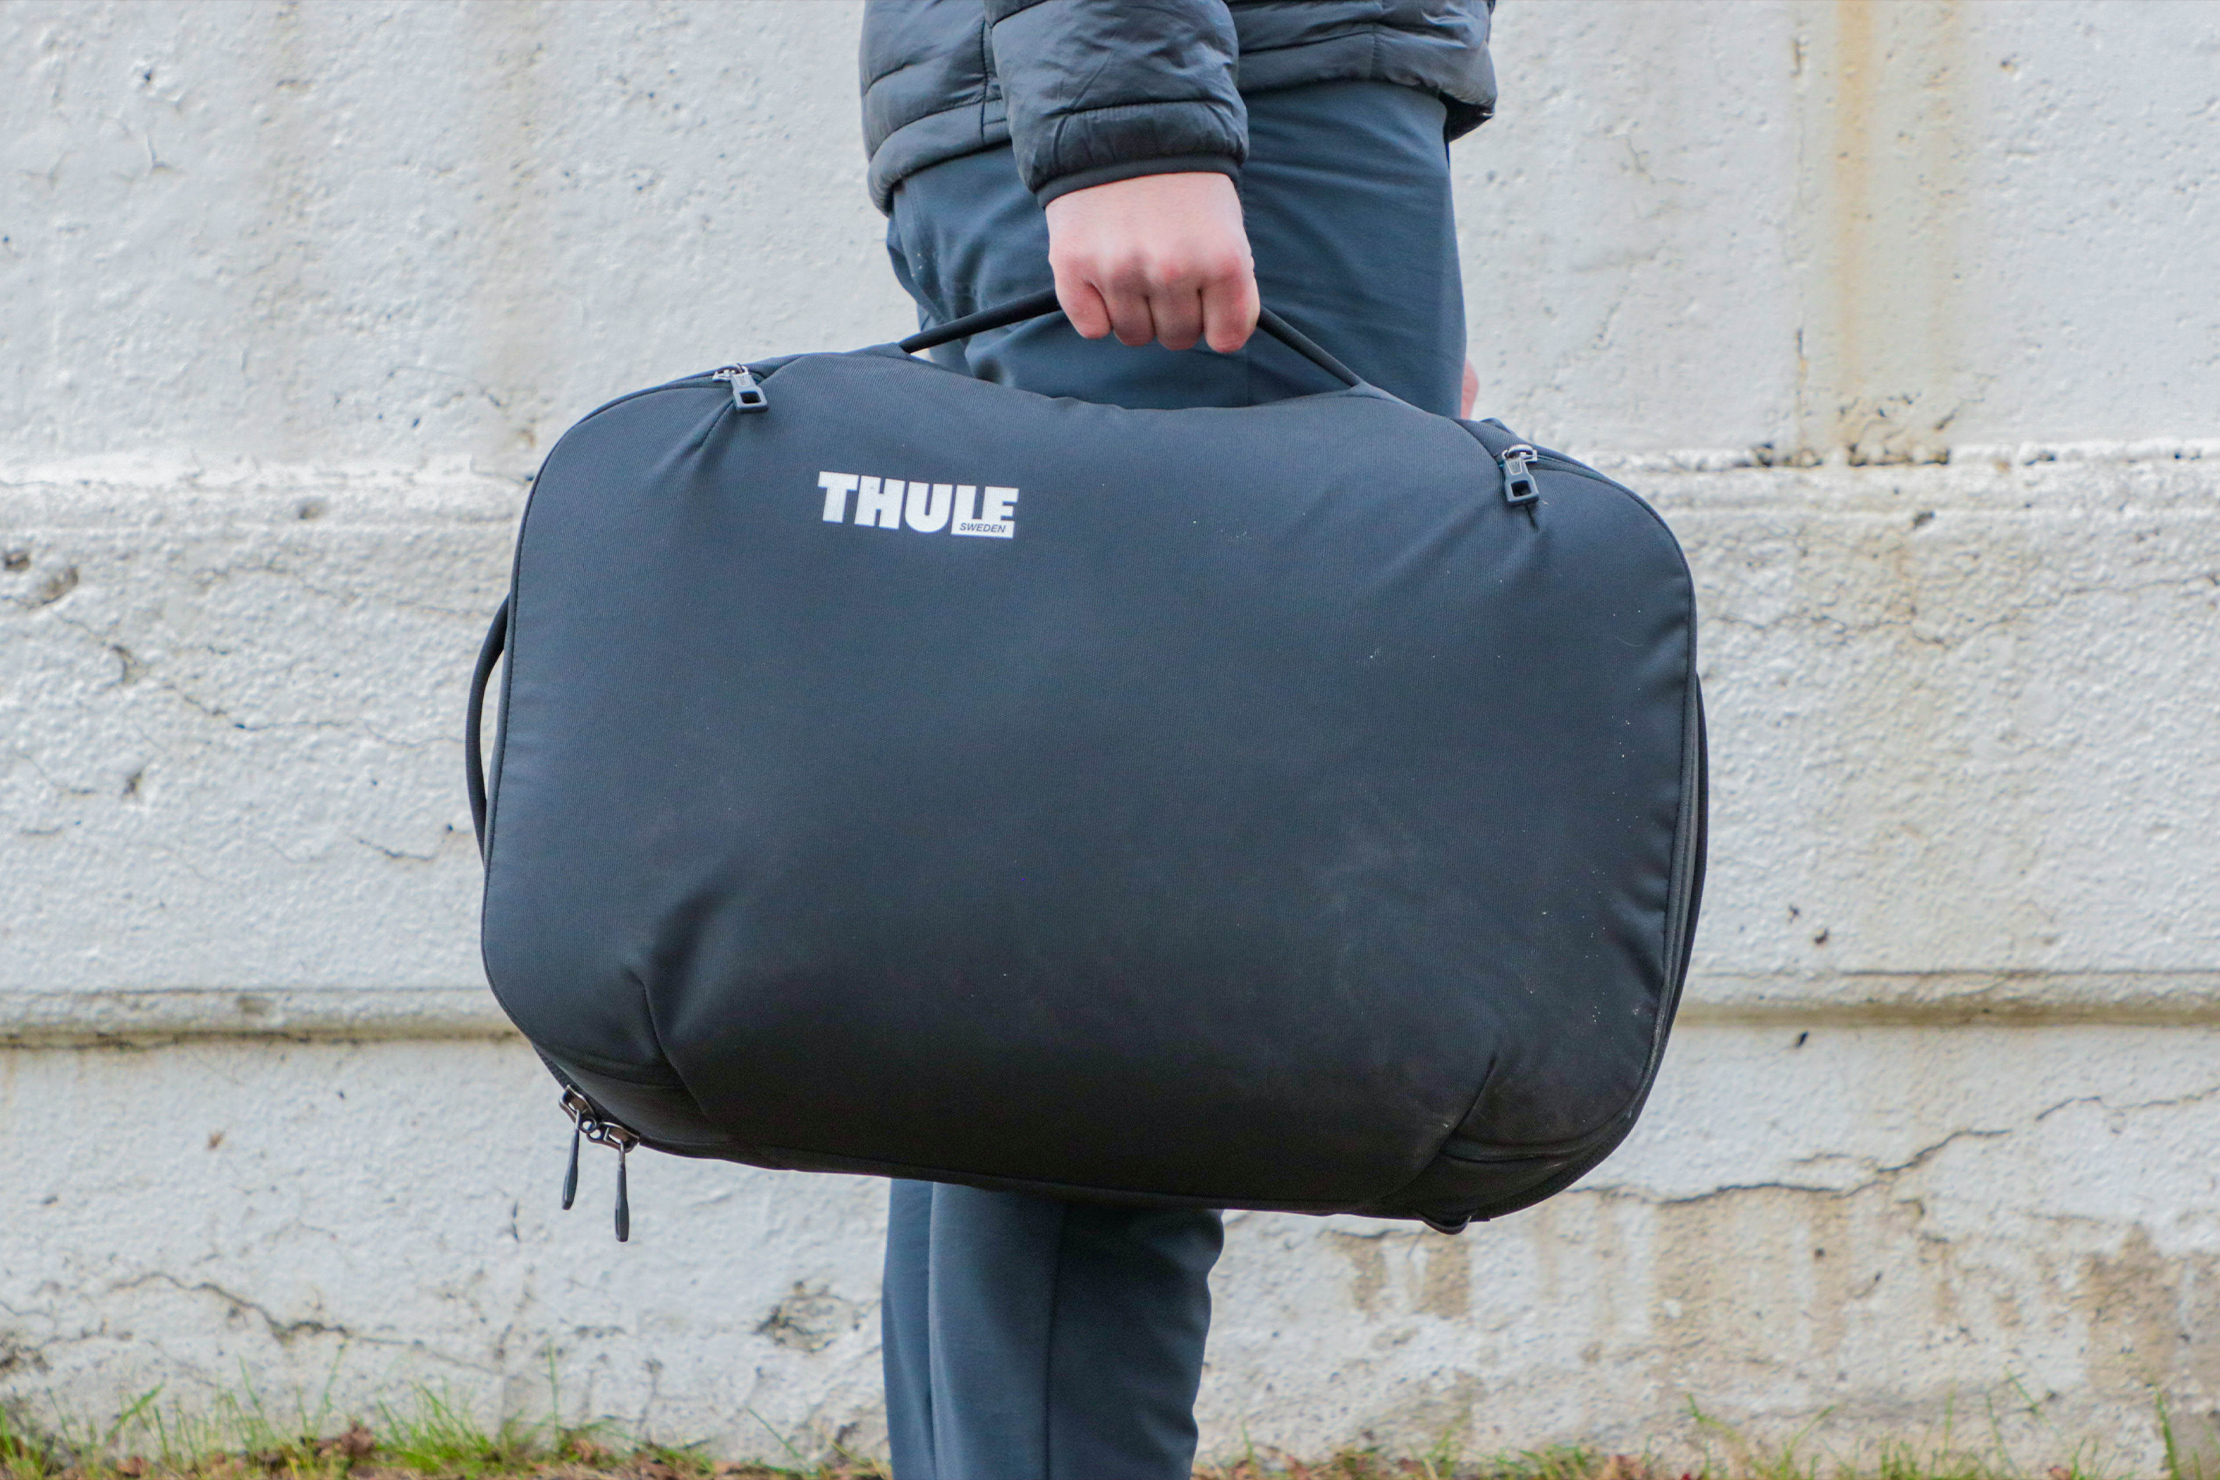 Thule Subterra Convertible Carry-On Duffel